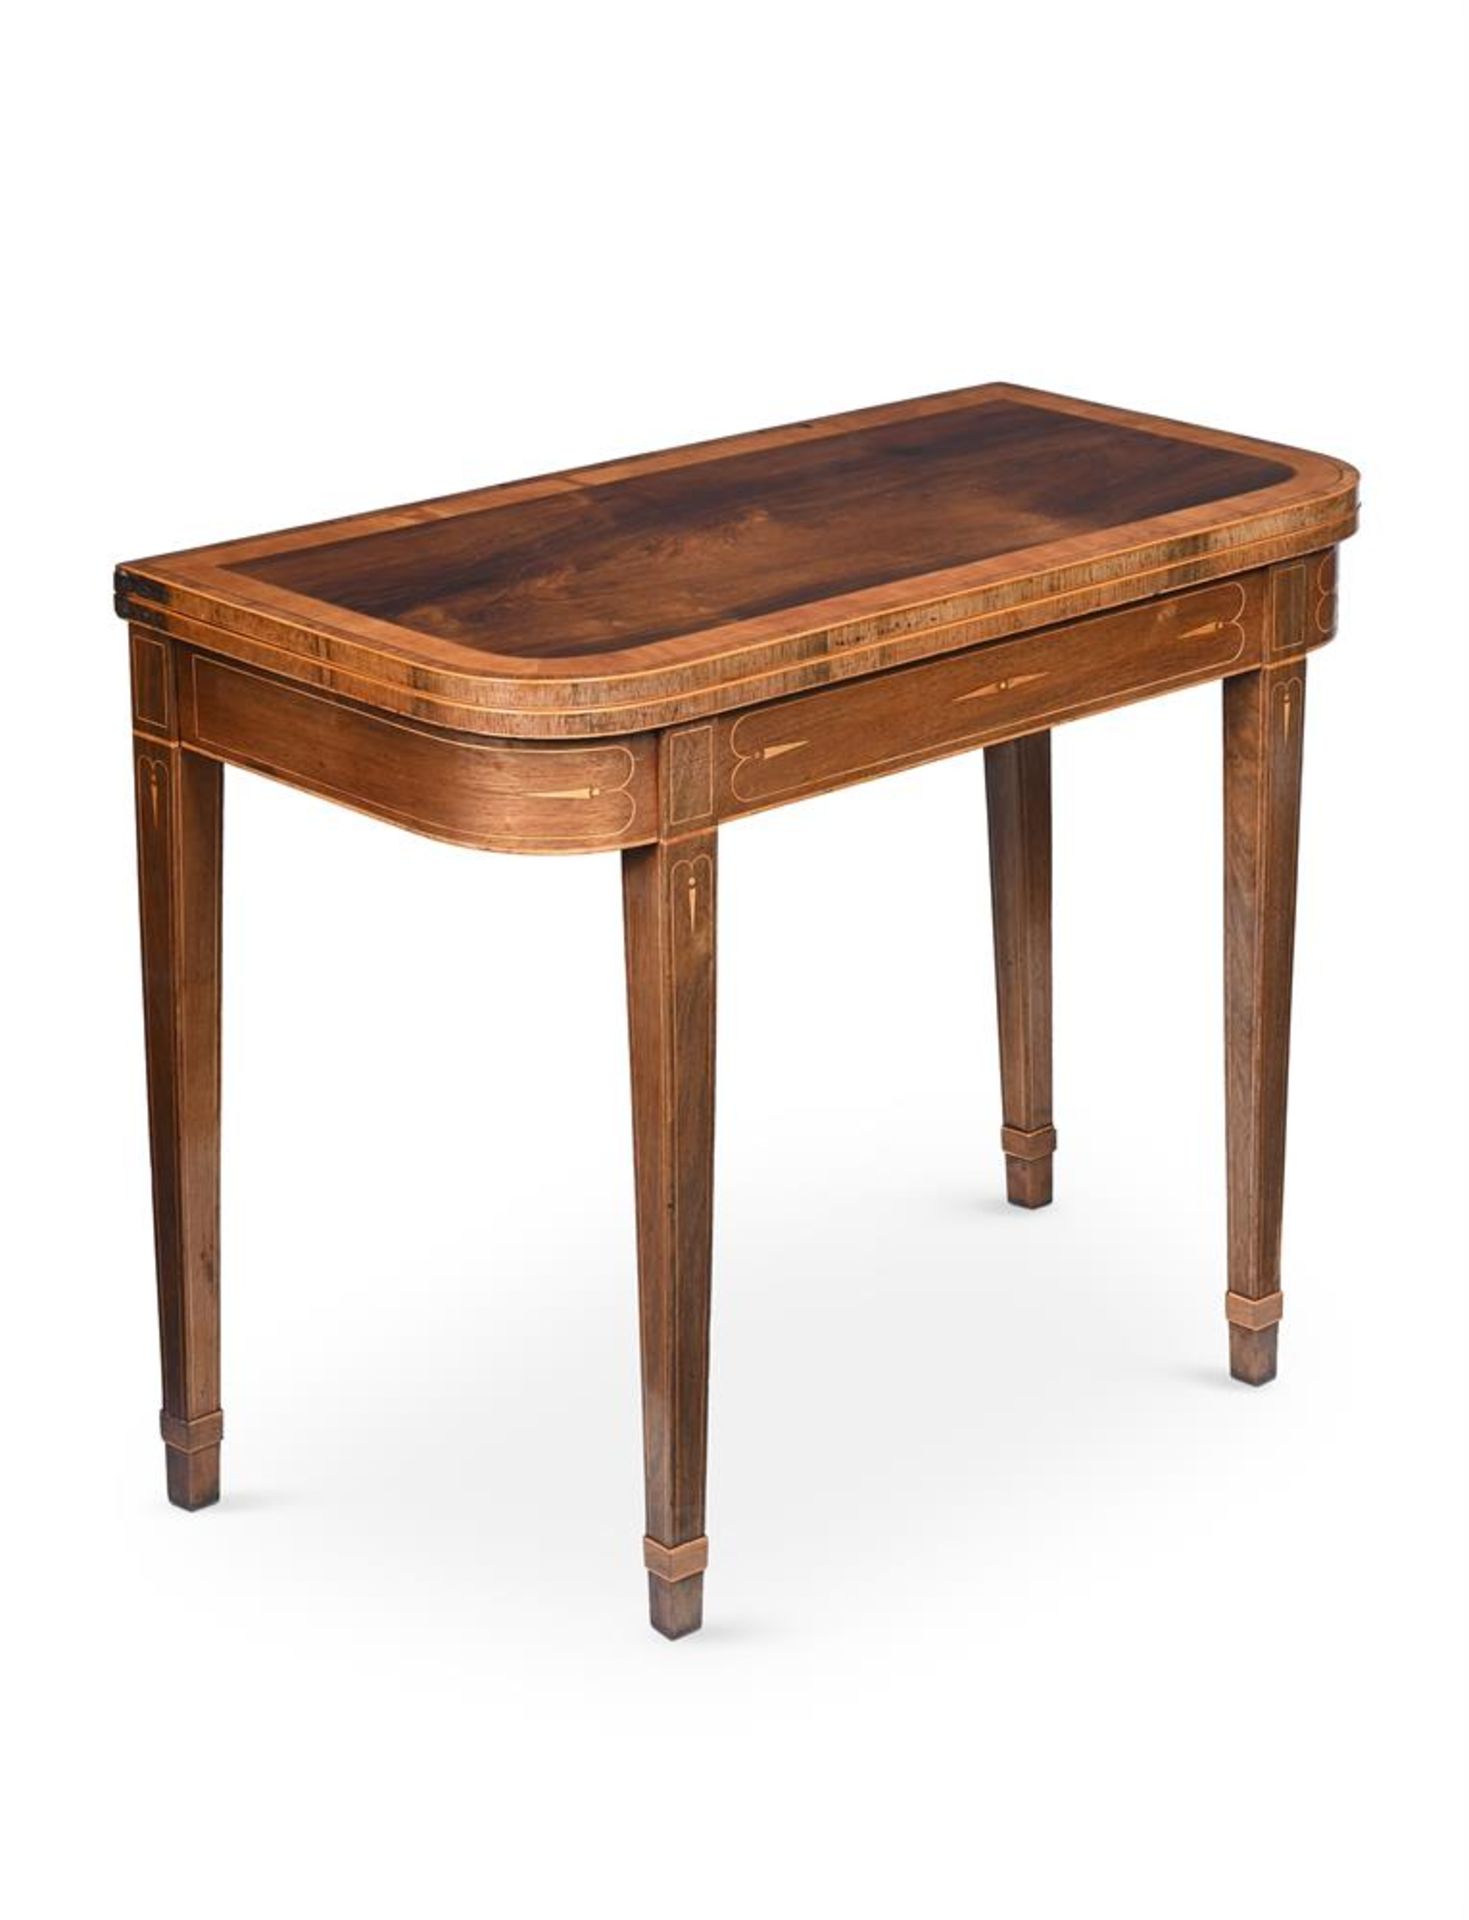 Y A PAIR OF GEORGE III ROSEWOOD AND SATINWOOD CROSSBANDED CARD TABLES, CIRCA 1790 - Image 2 of 8